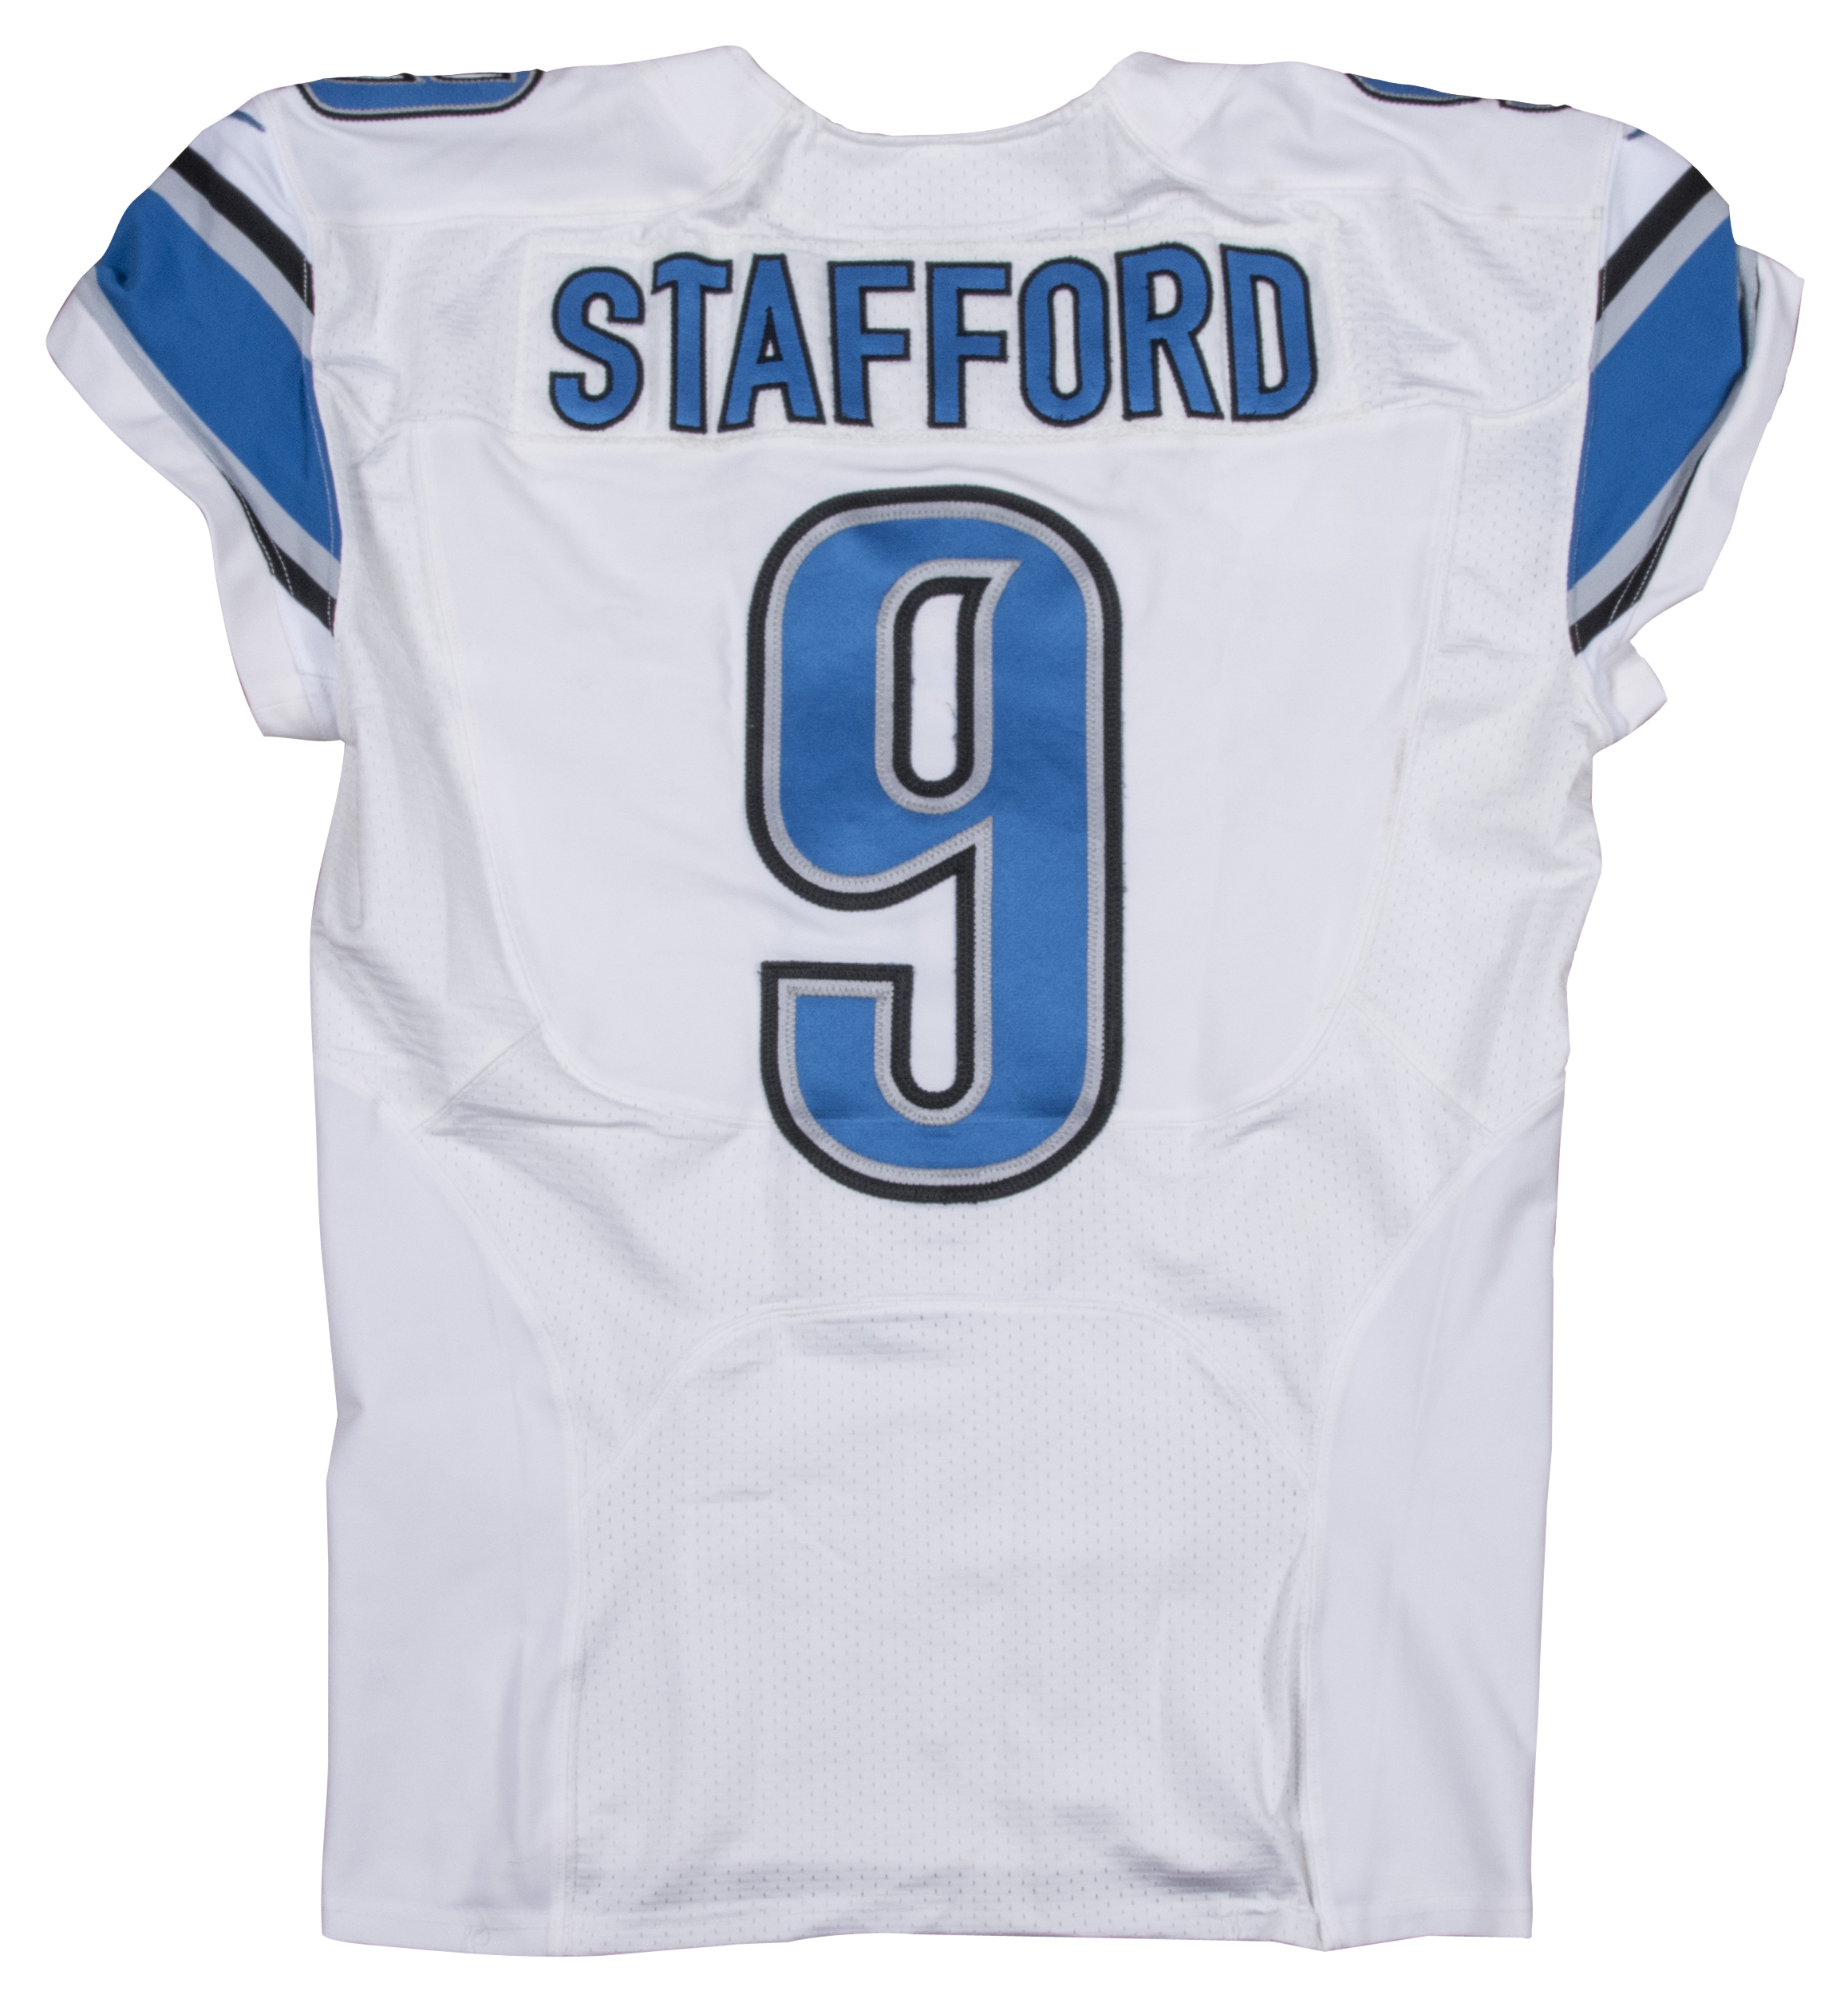 stafford jersey lions